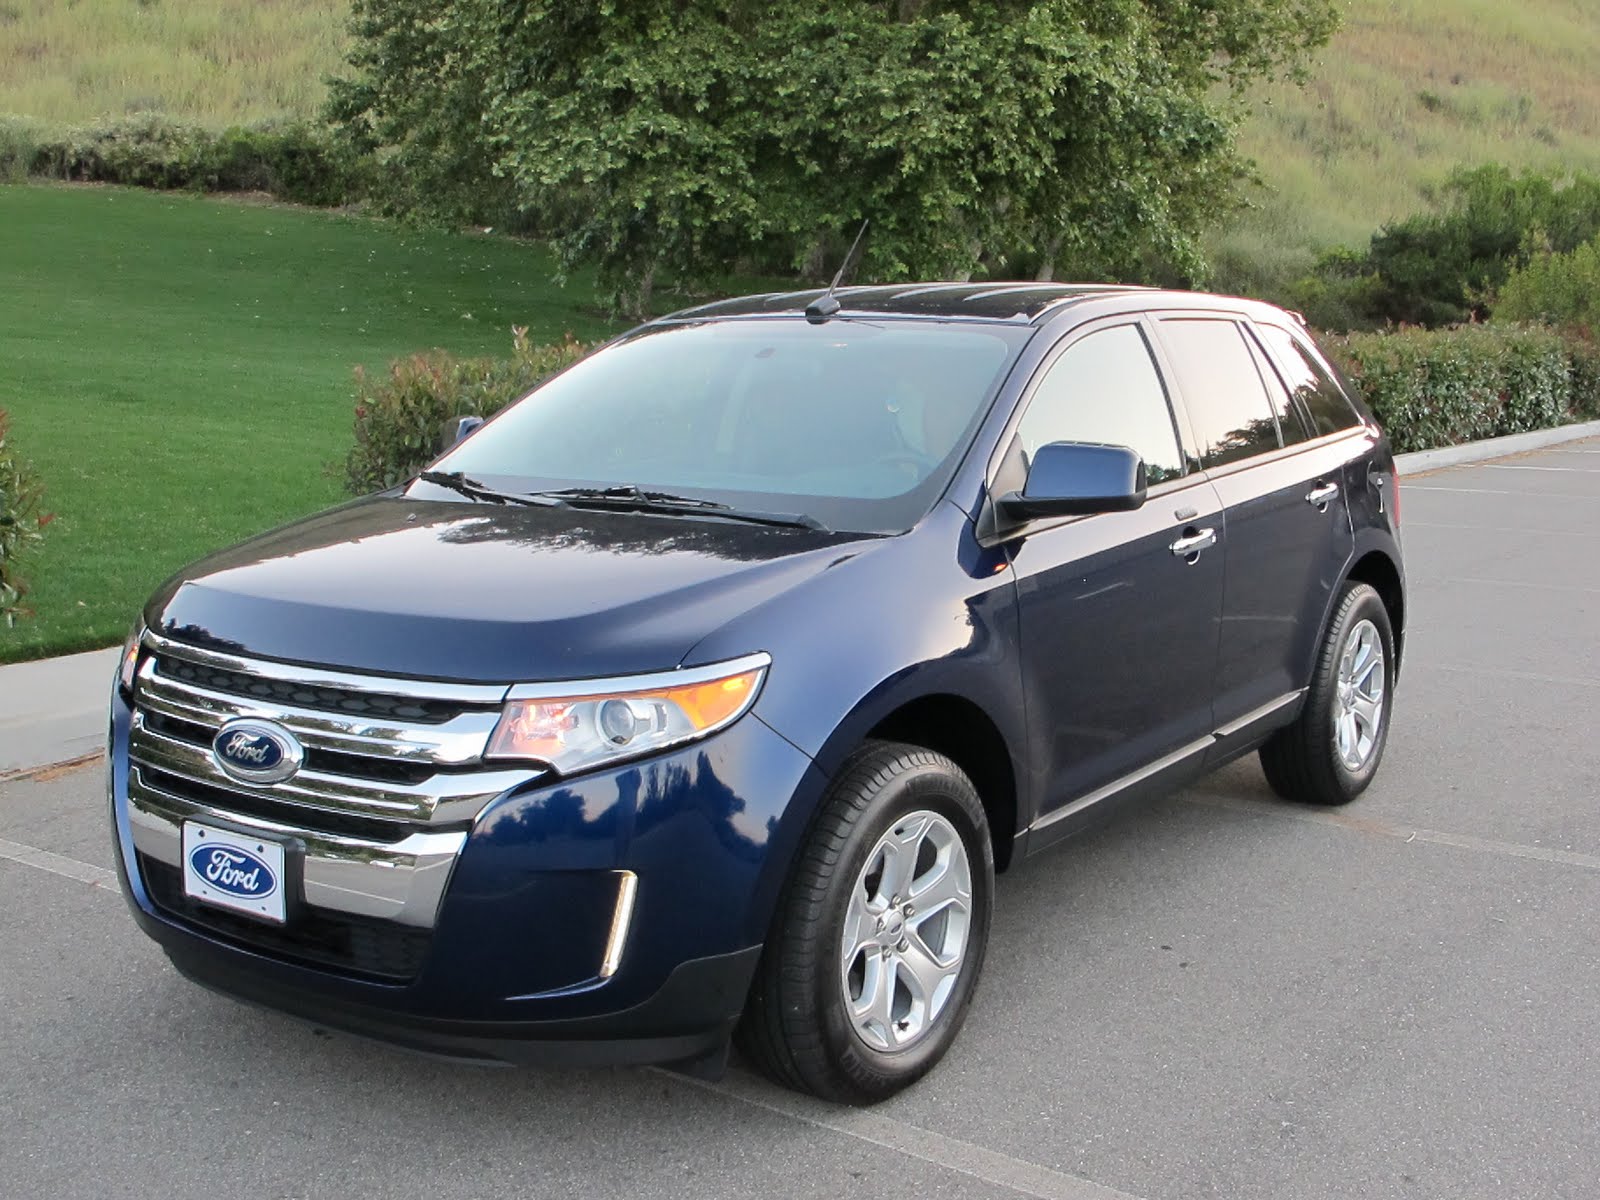 2011 Ford edge road test review #2